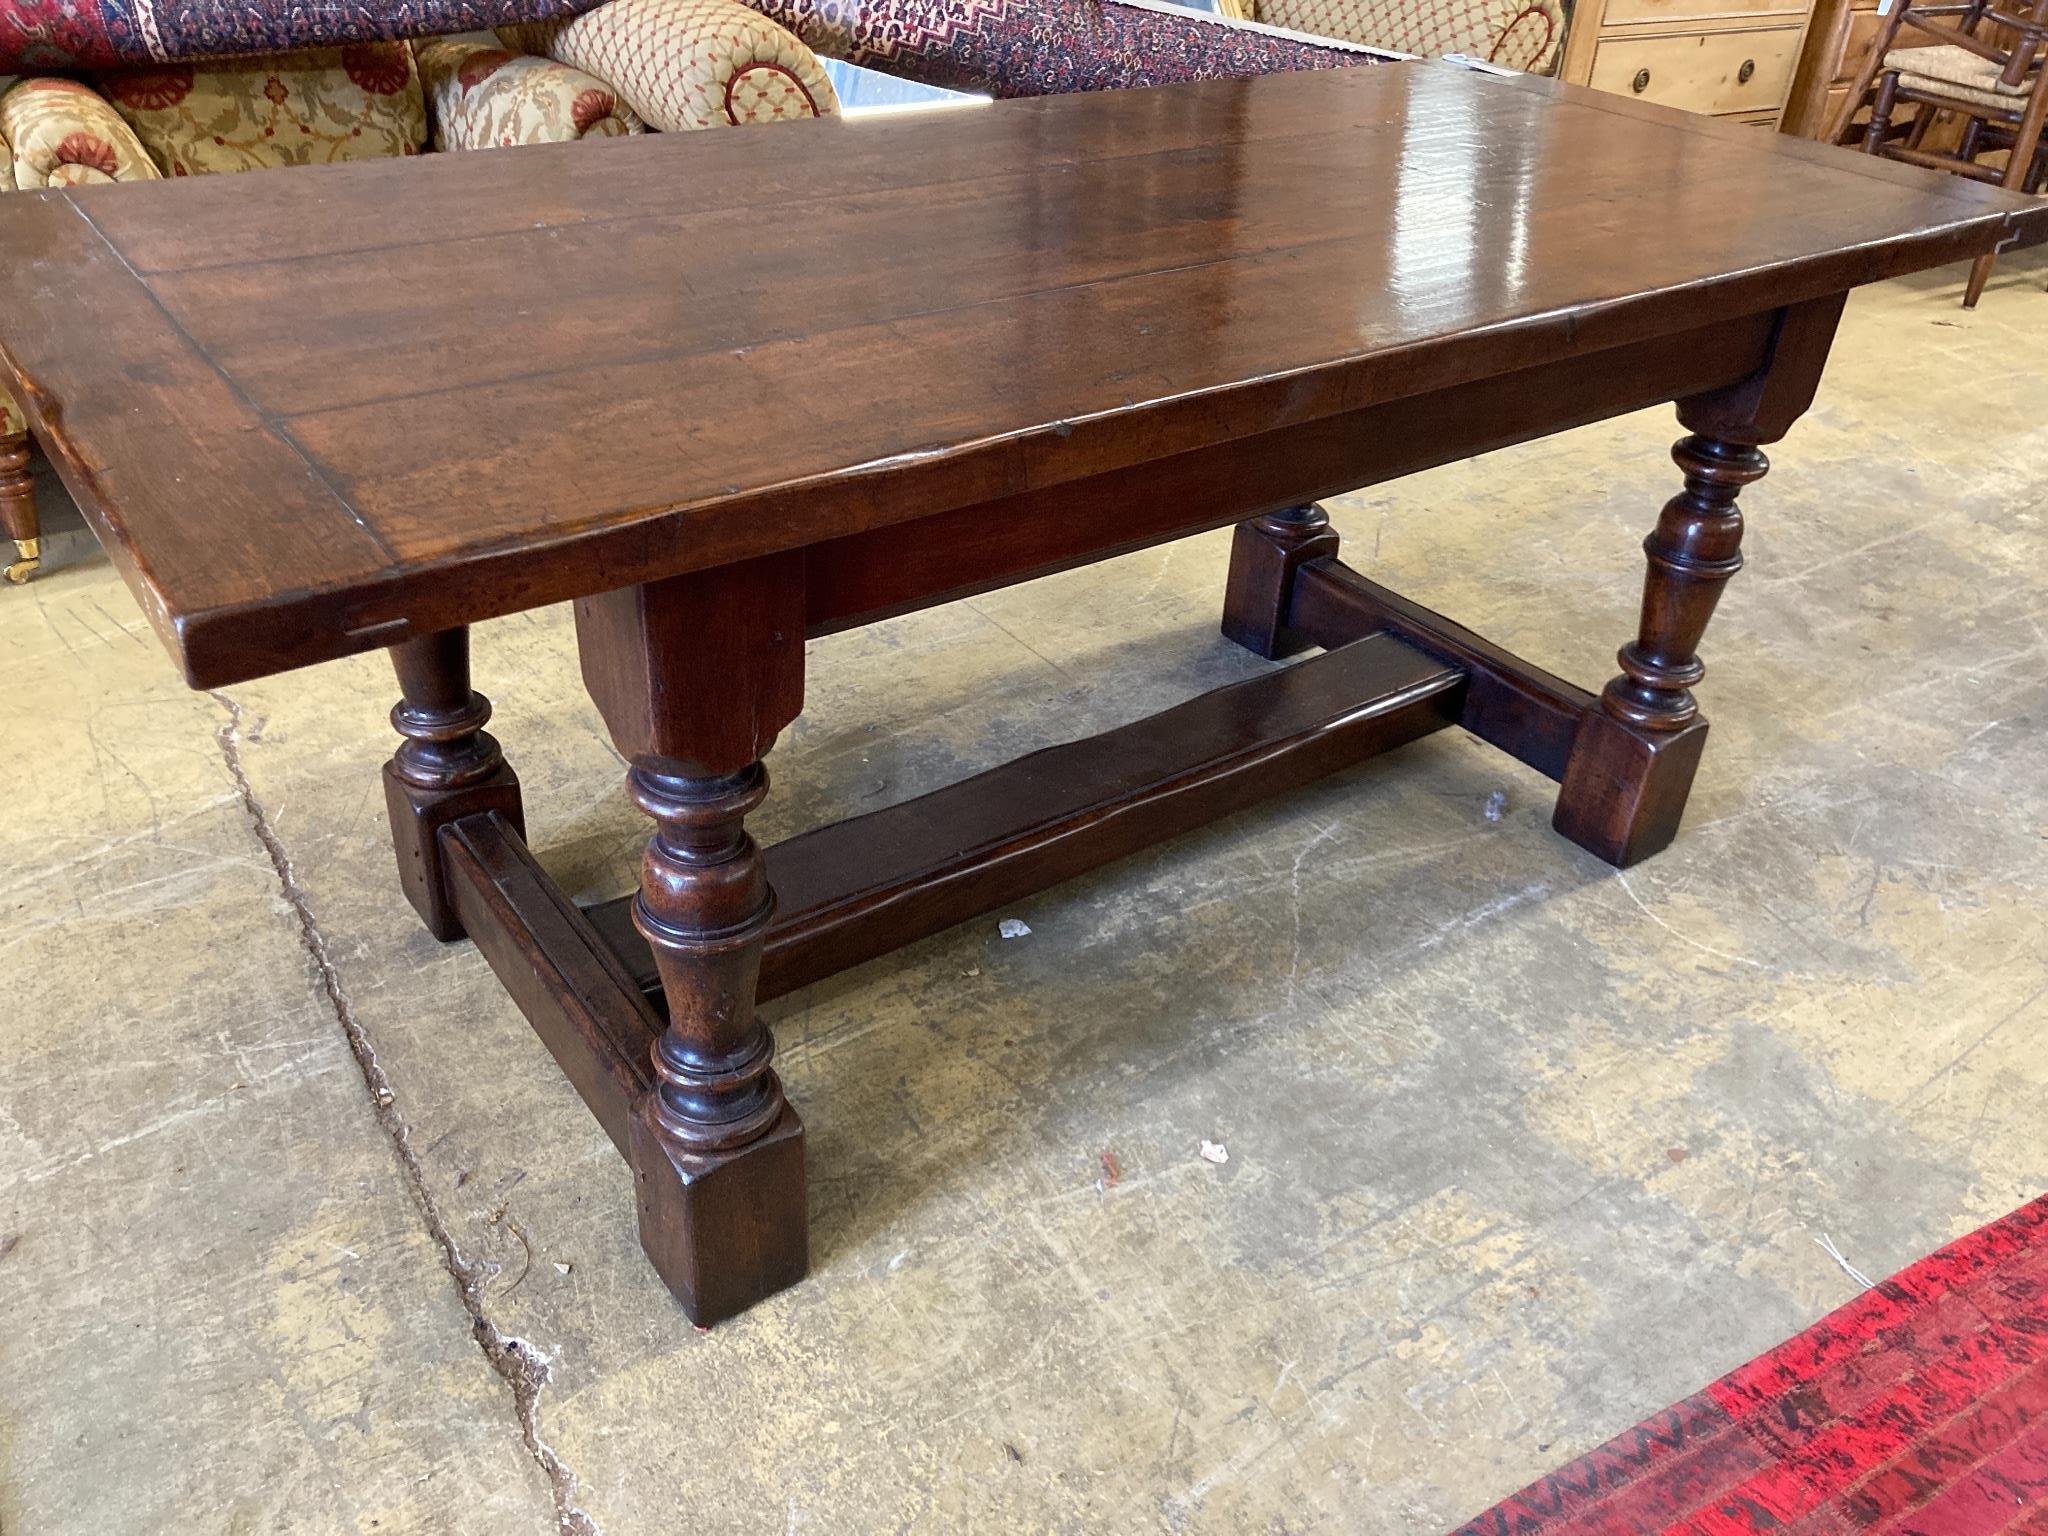 A 17th century style oak refectory table